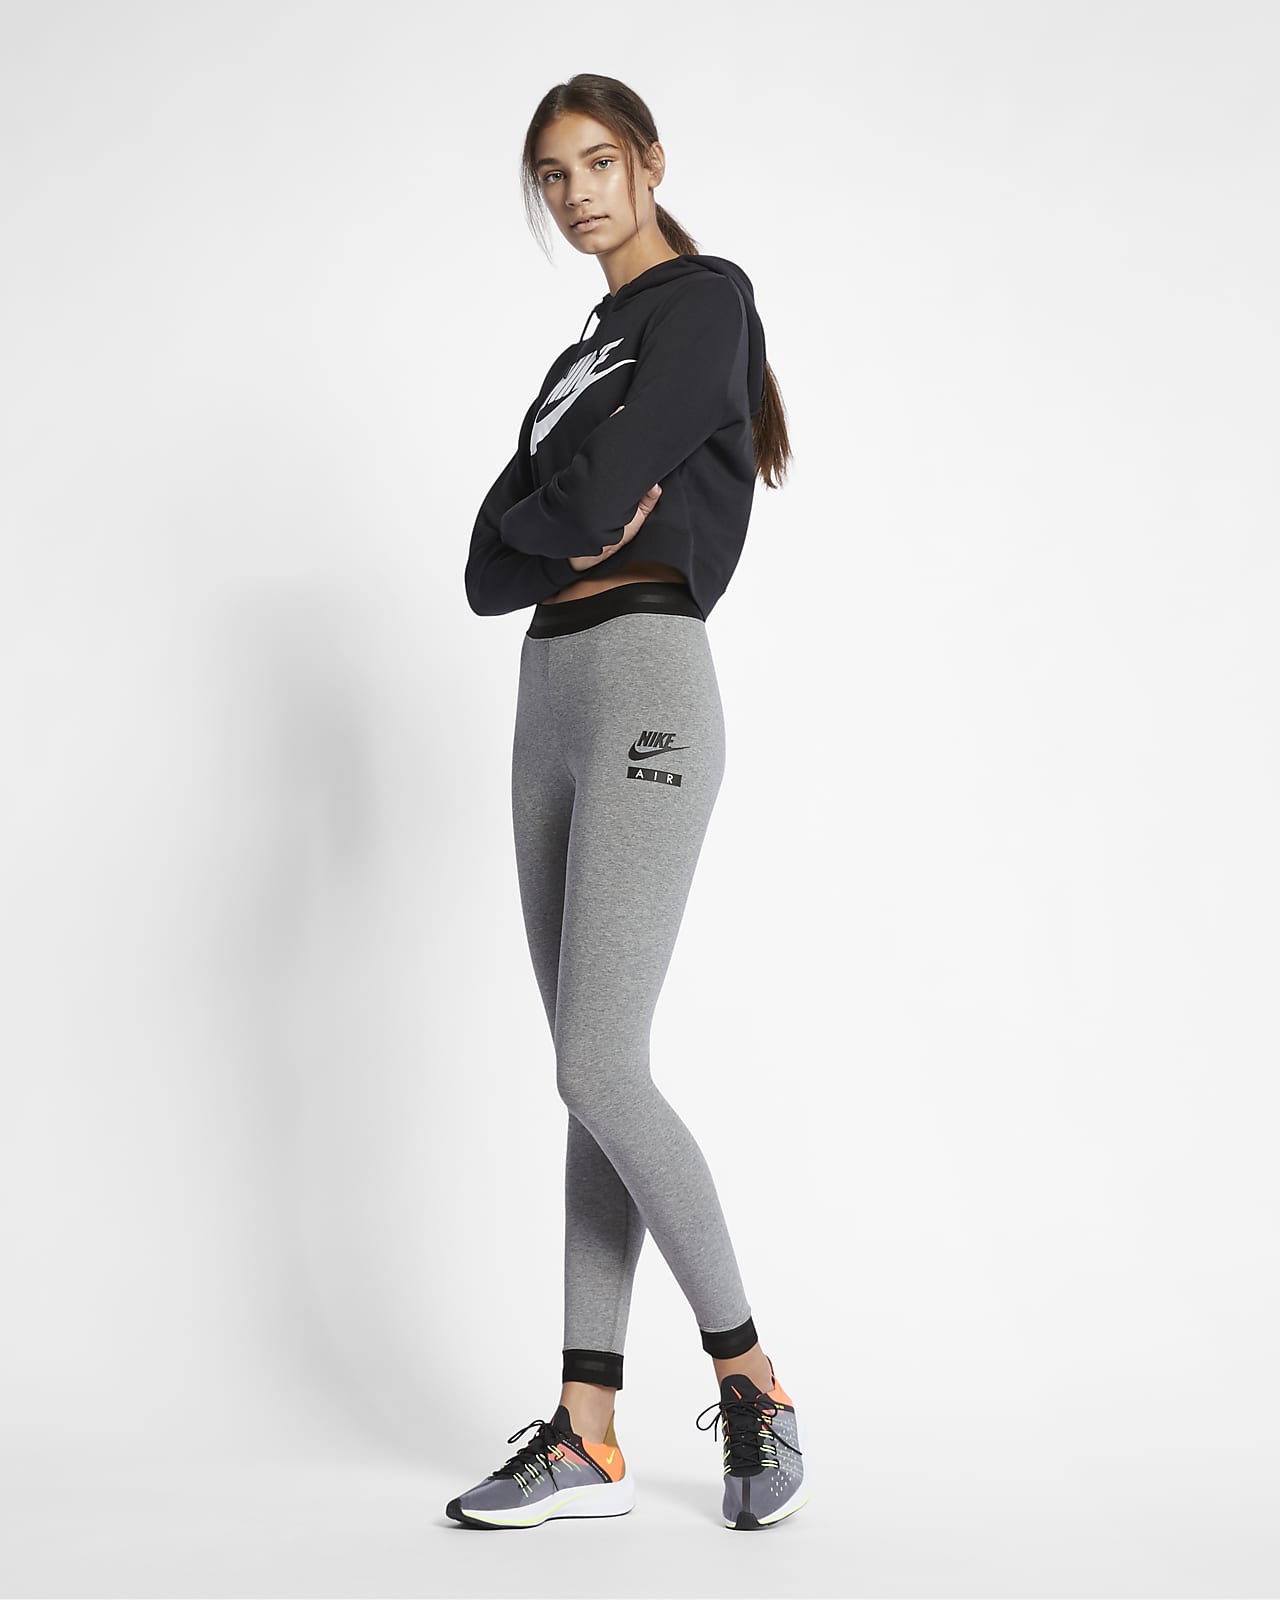 Women's Trousers & Tights. Nike IL